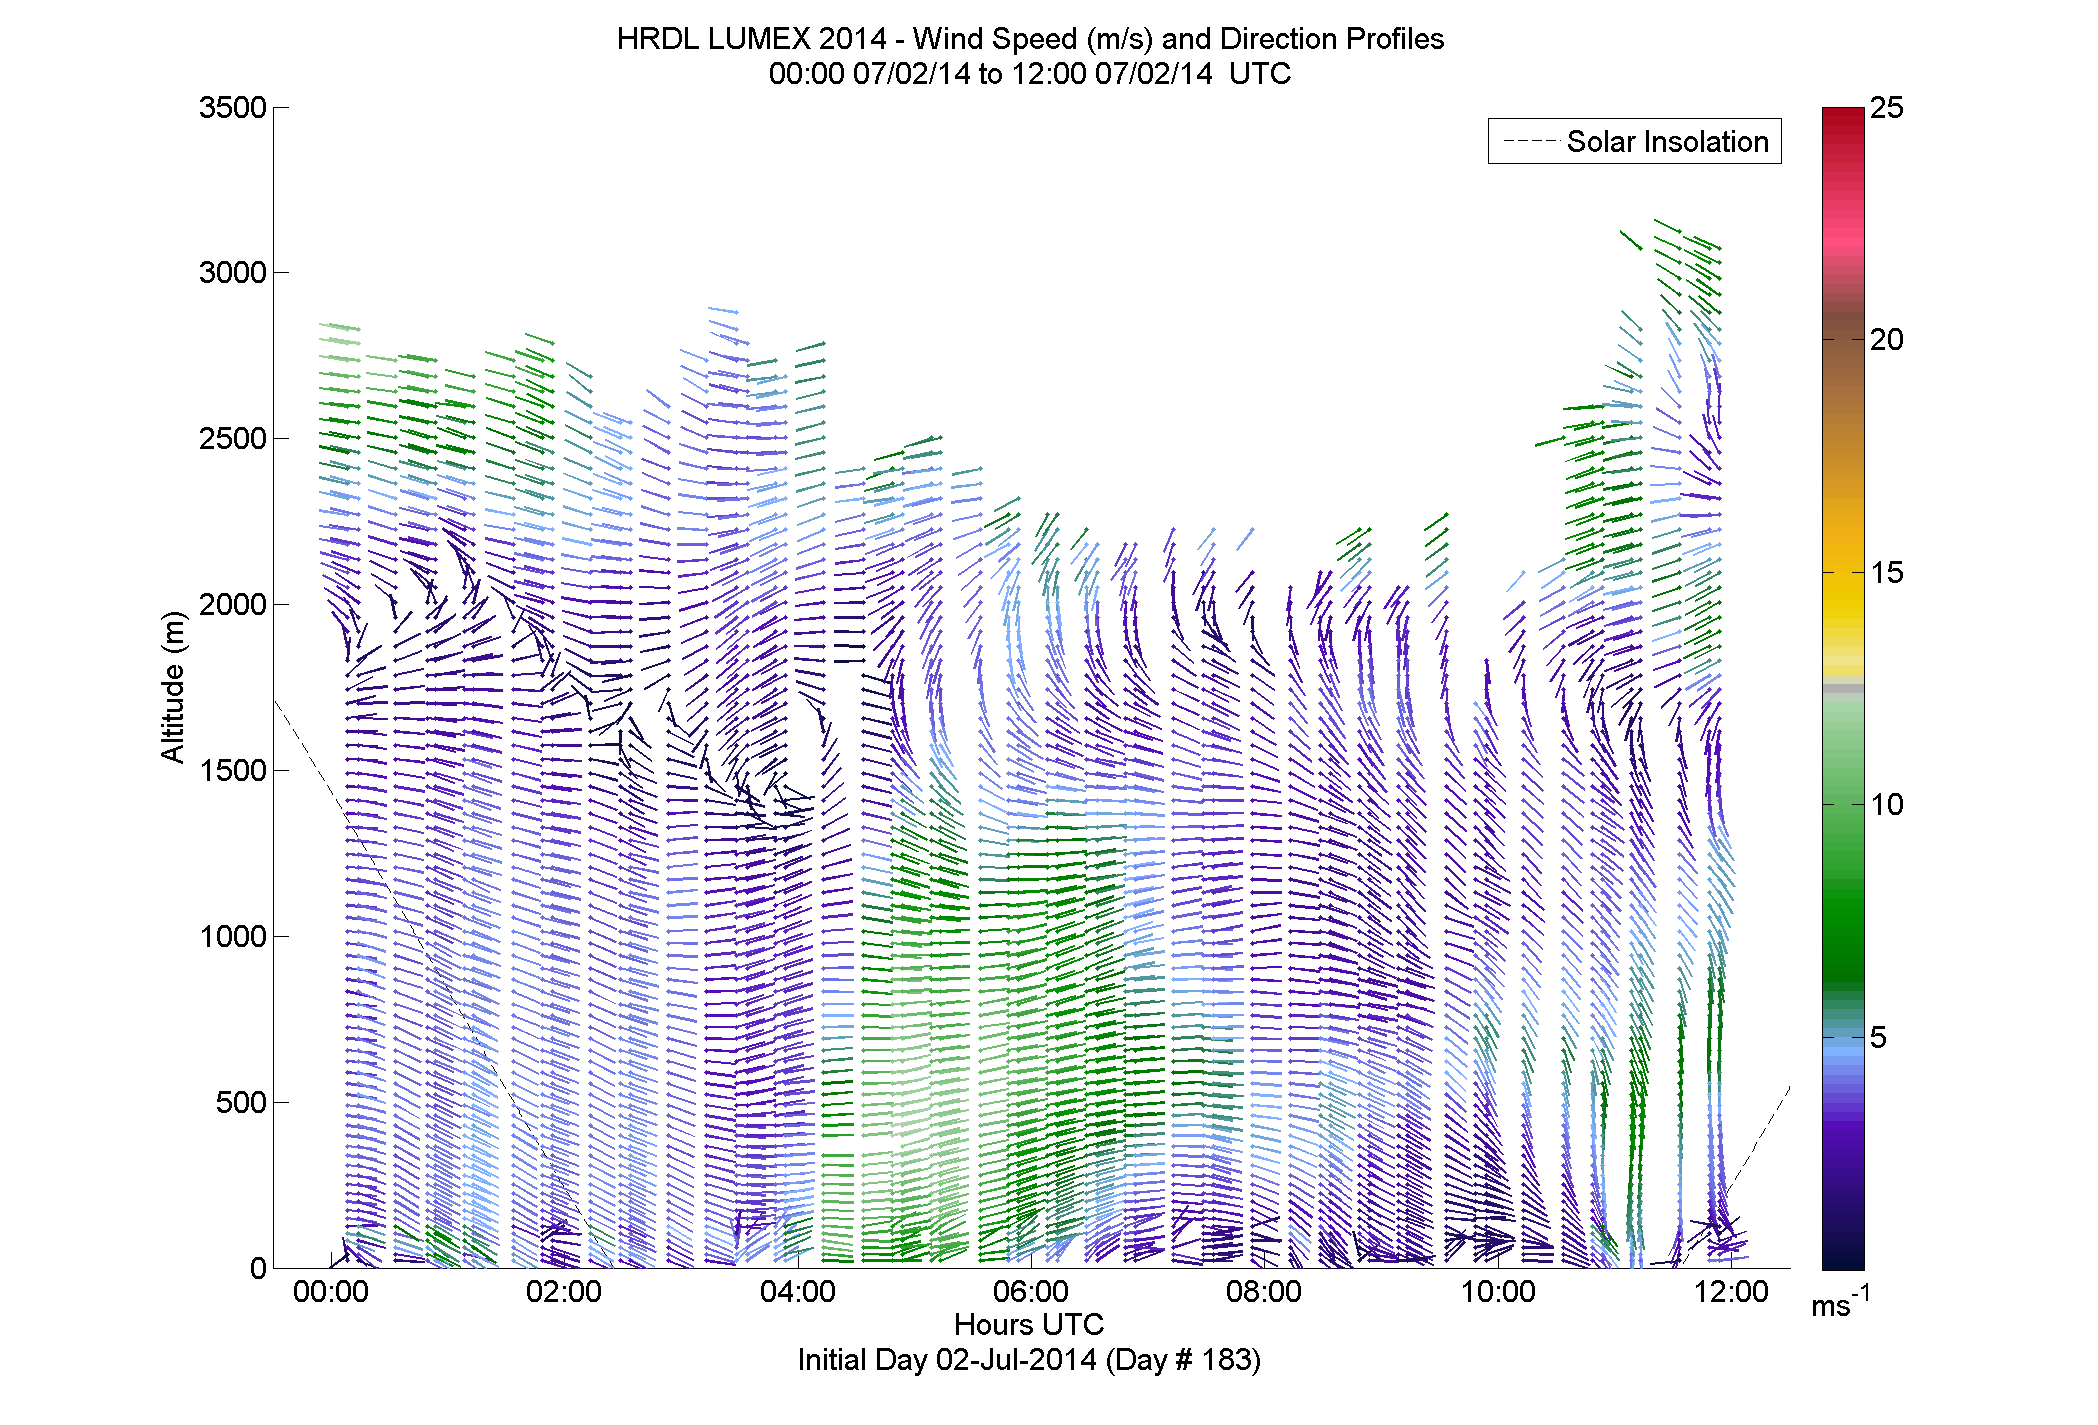 HRDL speed and direction profile - July 2 am